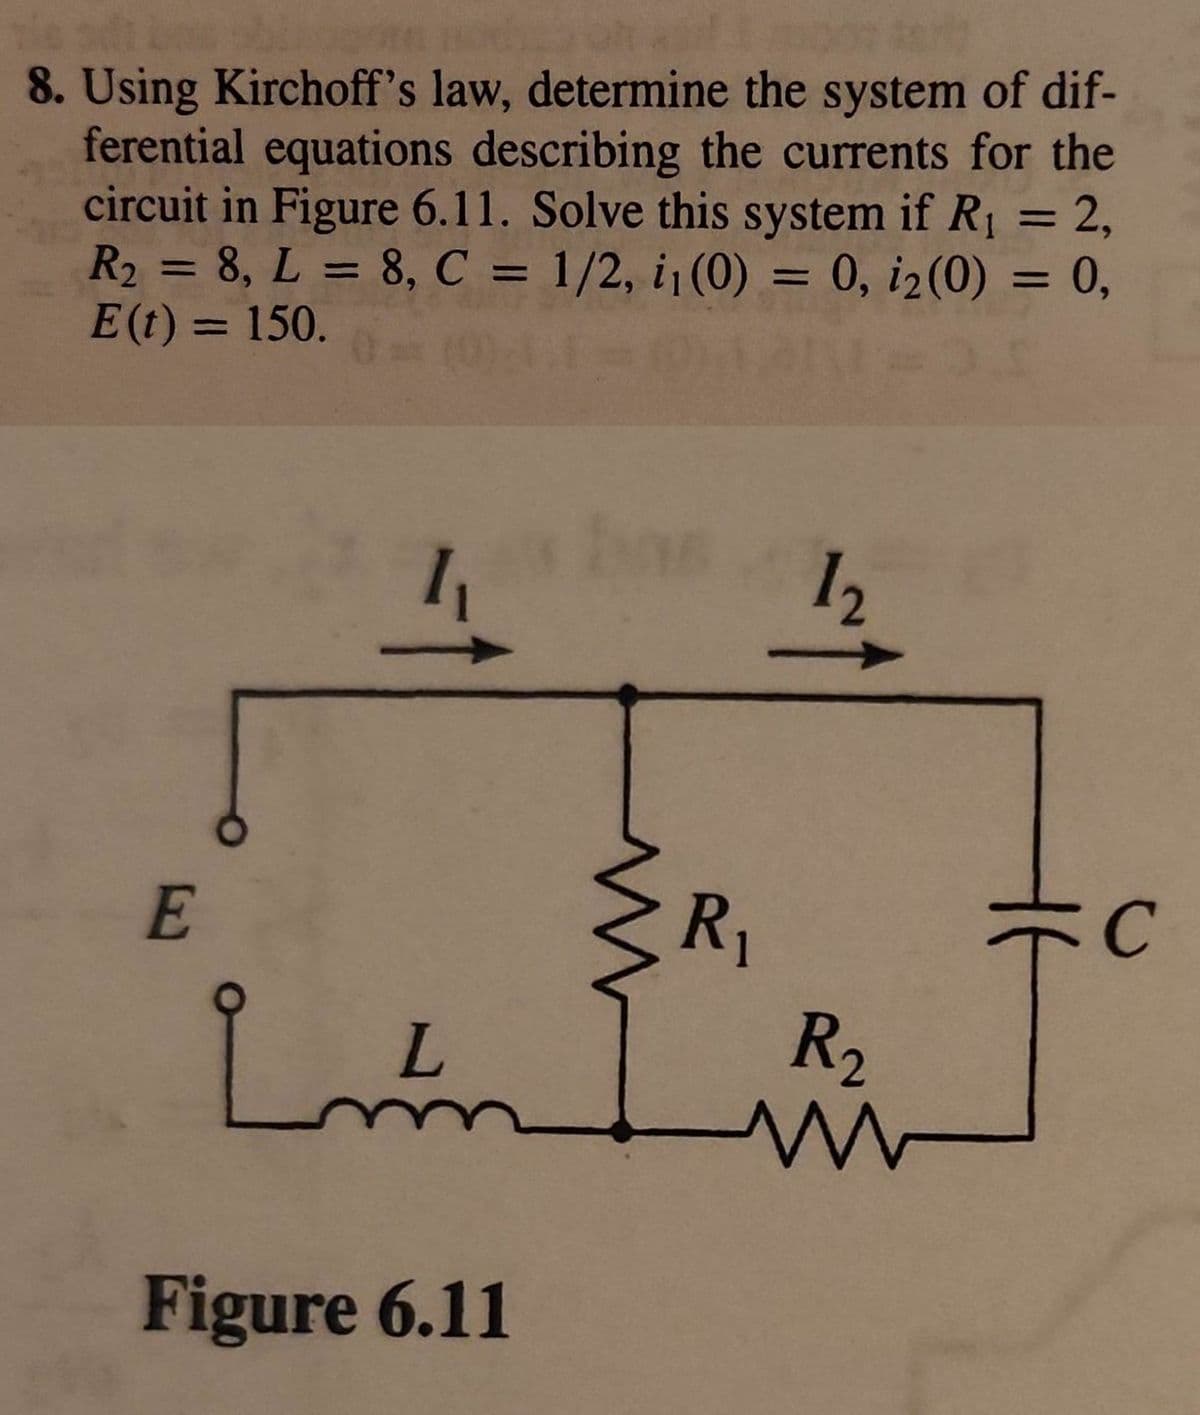 8. Using Kirchoff's law, determine the system of dif-
ferential equations describing the currents for the
circuit in Figure 6.11. Solve this system if R₁ = 2,
R₂ = 8, L = 8, C = 1/2, i₁ (0) = 0, i₂(0) = 0,
E (t) = 150.
0 = (0).1.1- (01.
E
R₁
Lund R₂
www
تها
12
Figure 6.11
C